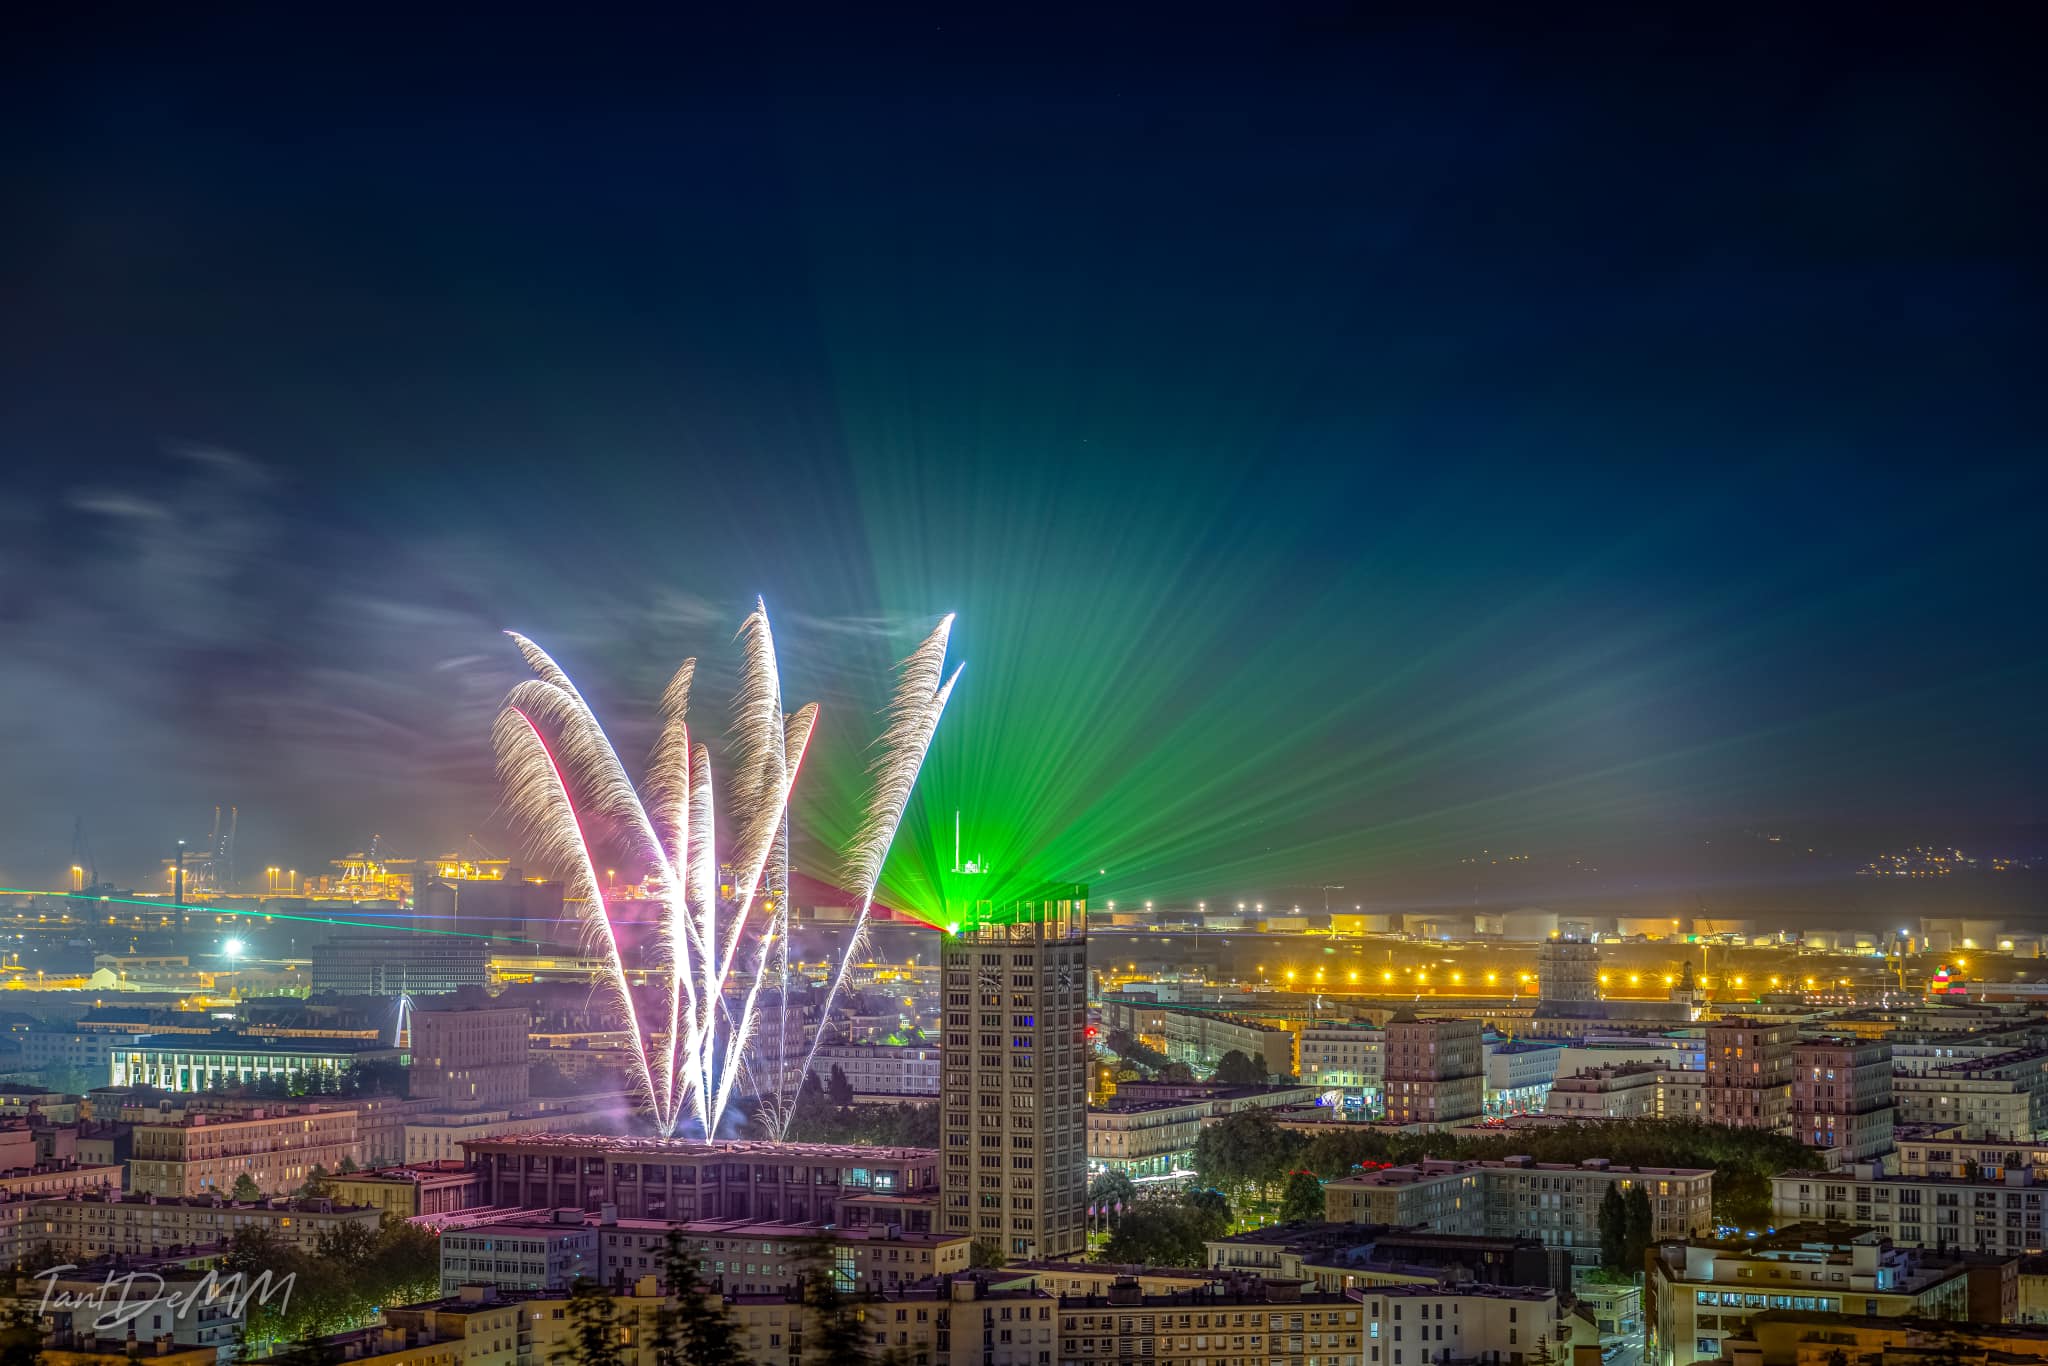 Photo of a tower with projection of fireworks and green laser beams